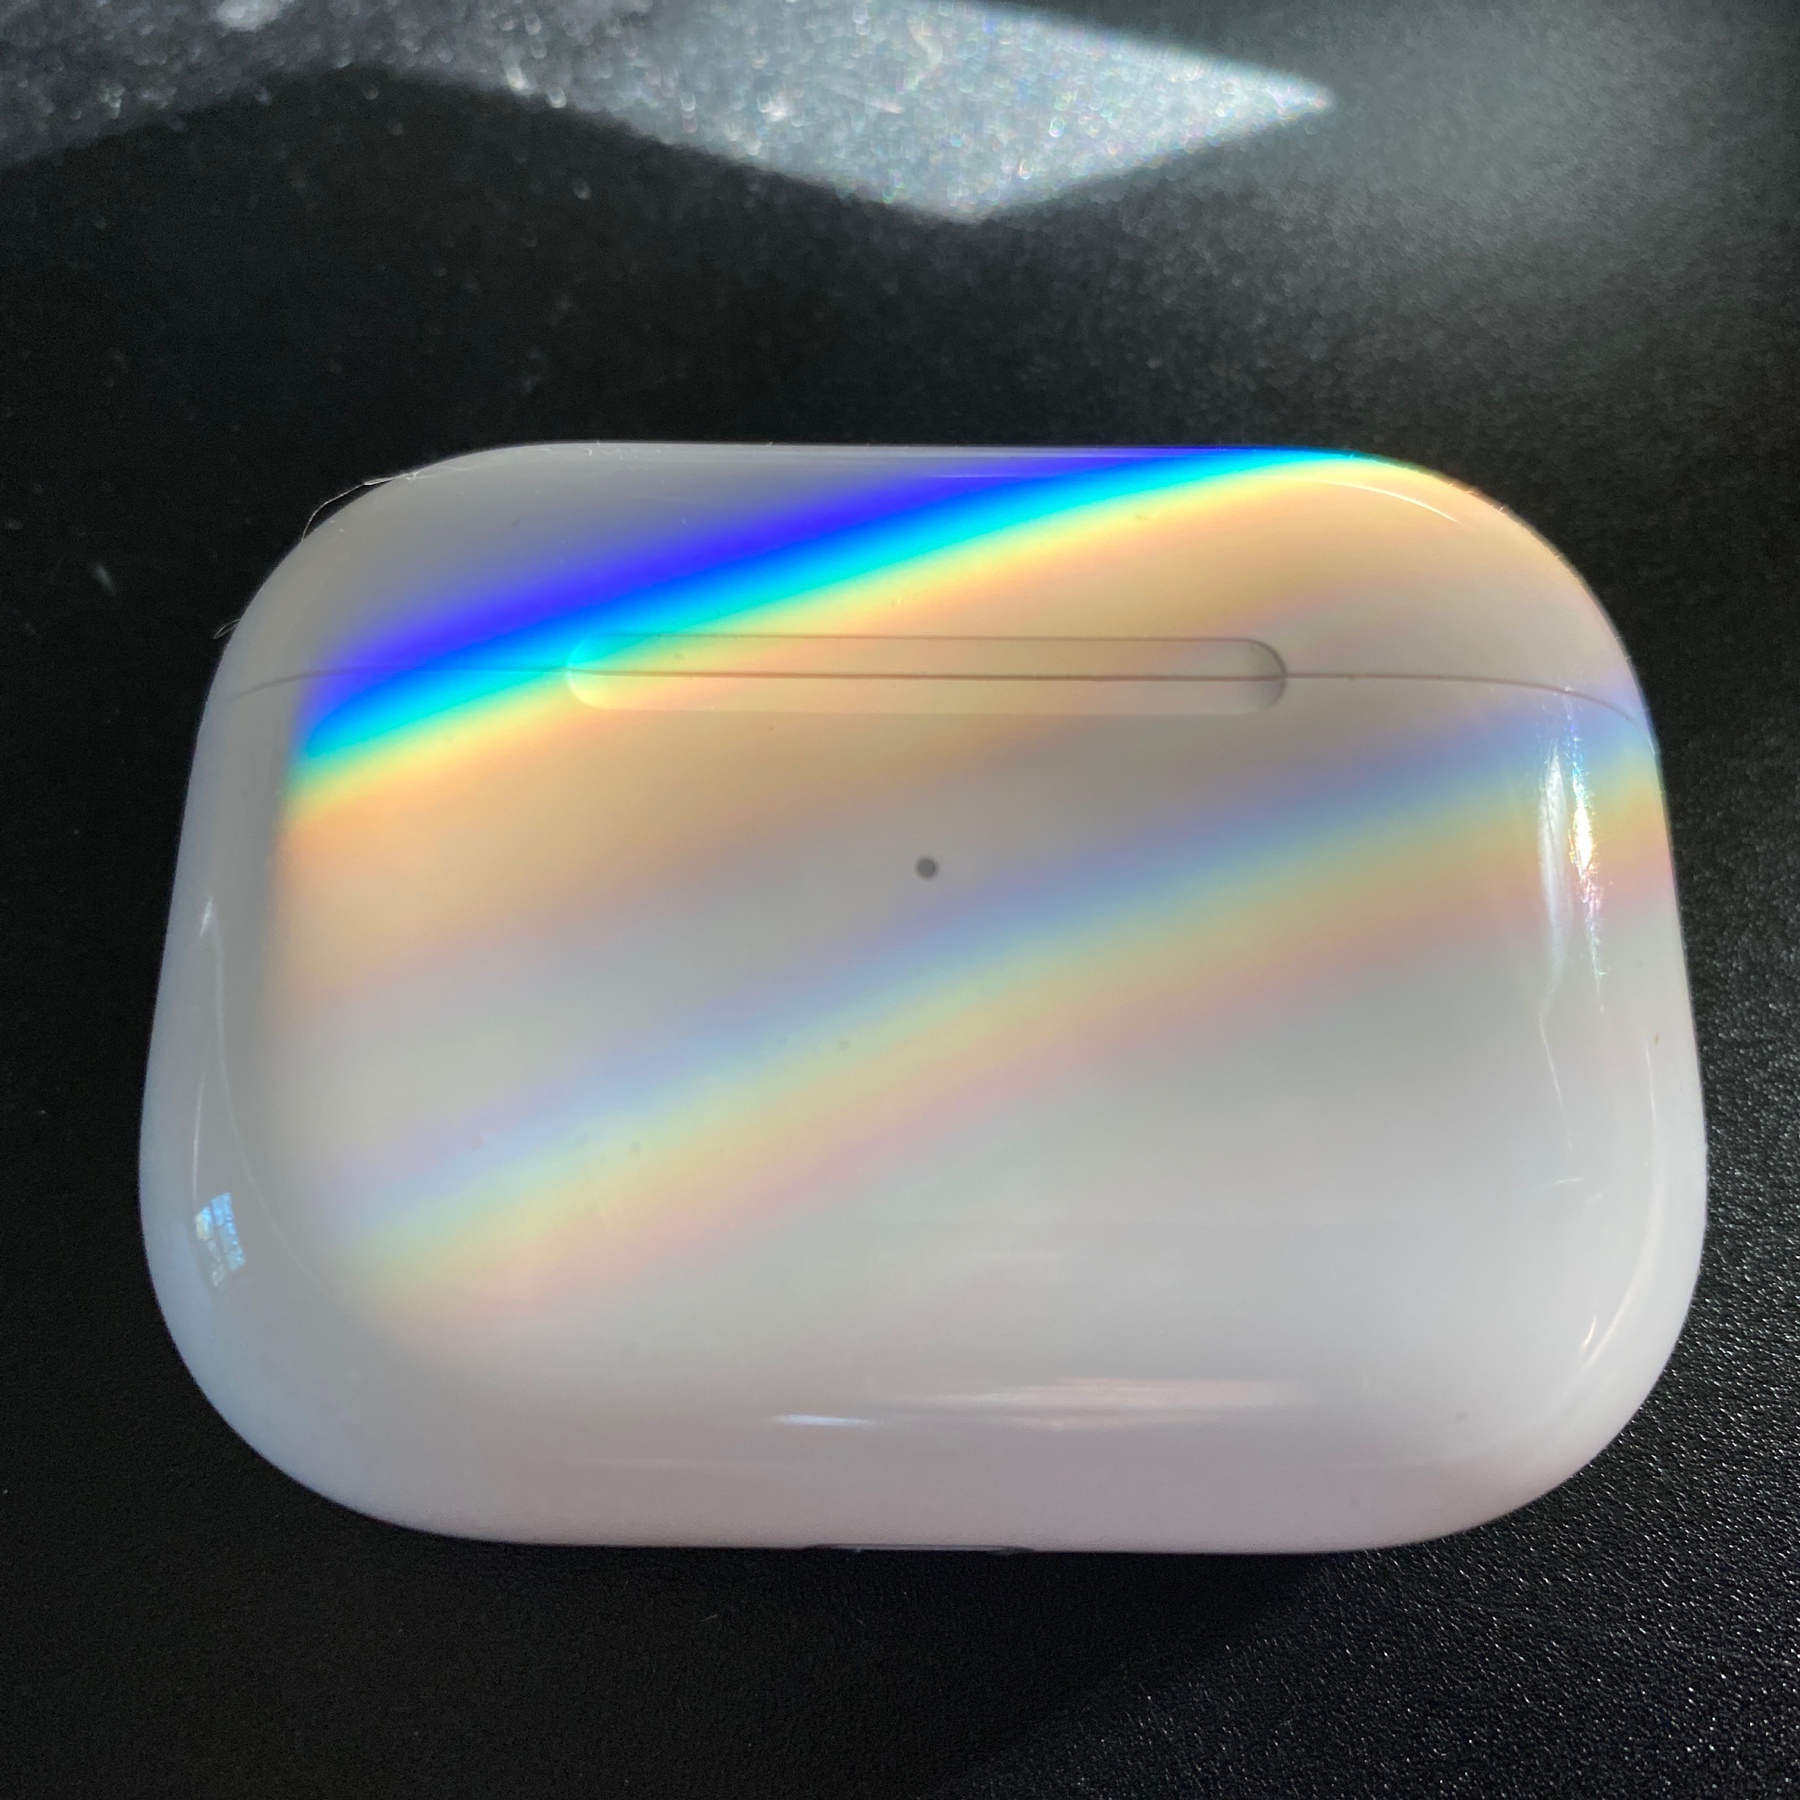 AirPods Pro case with refracted rainbow stripes on it.